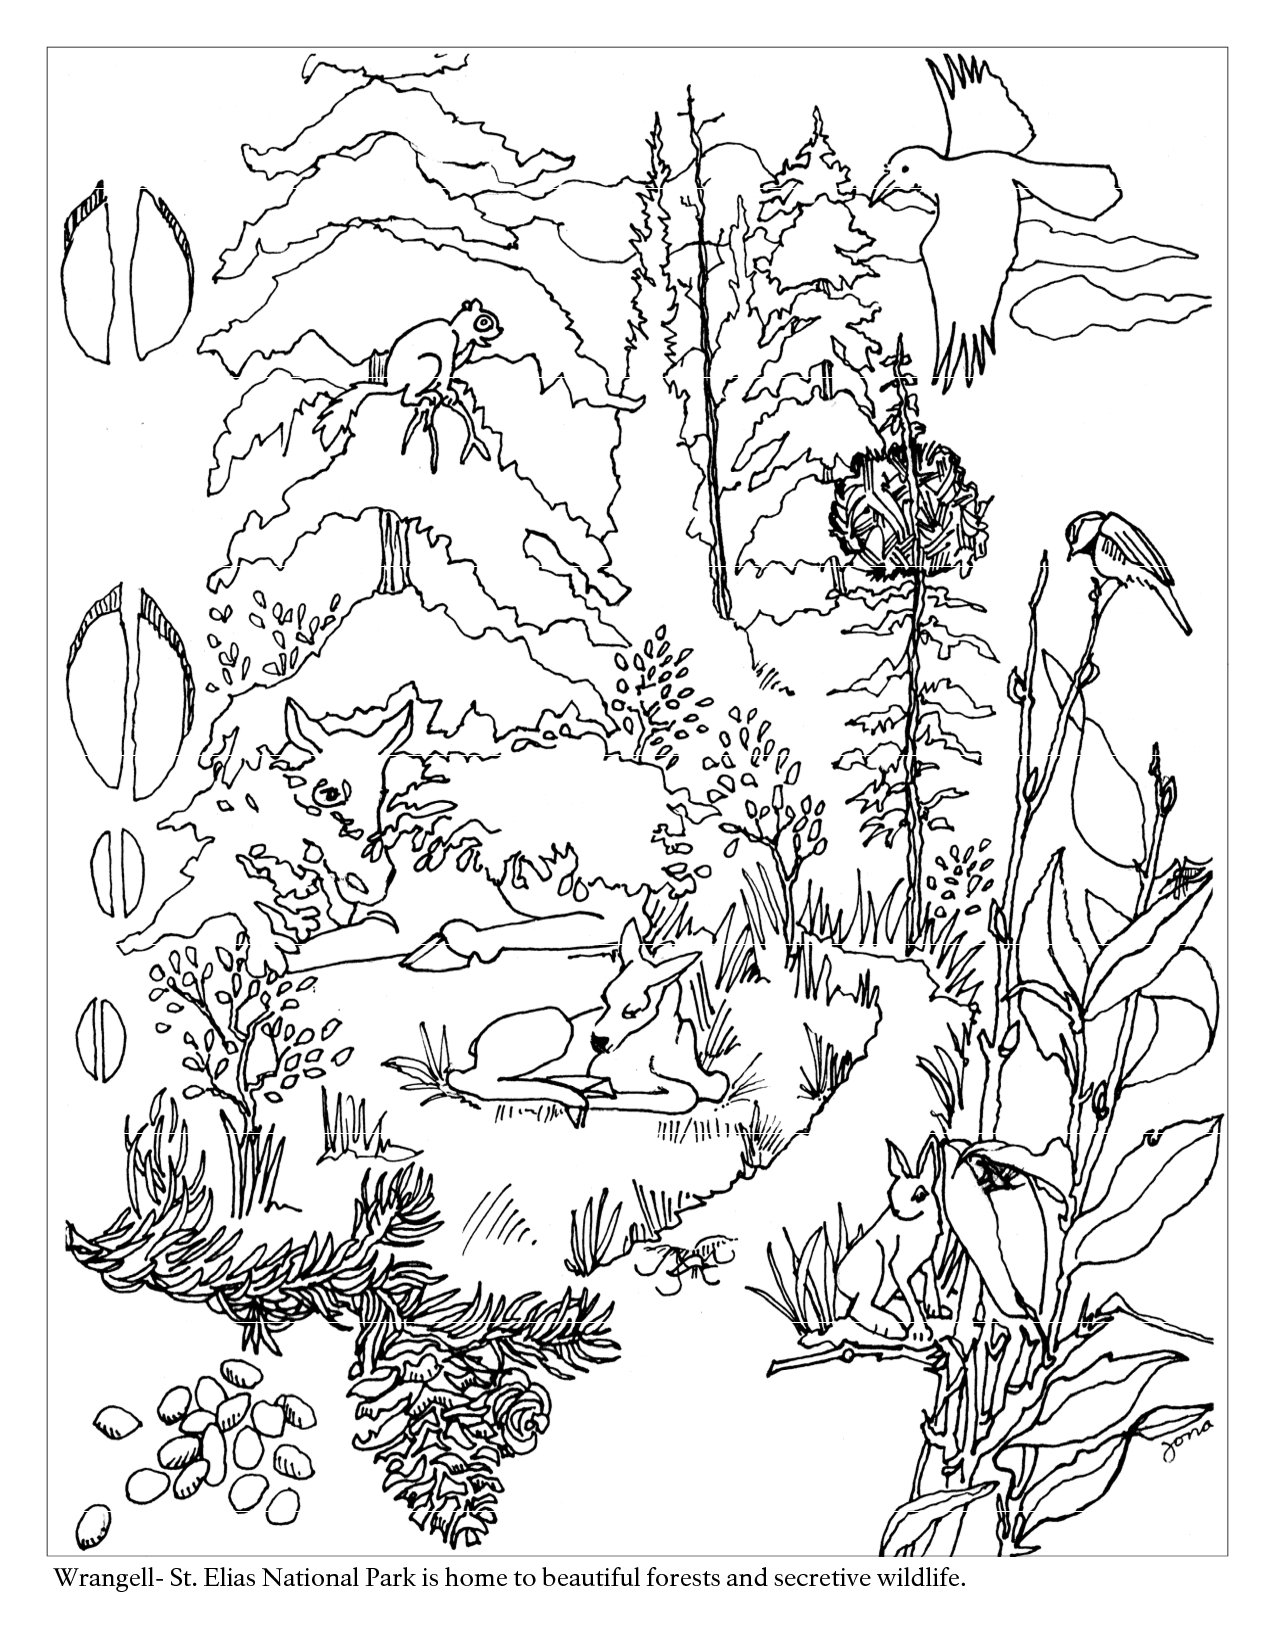 forest coloring page | High Quality Coloring Pages